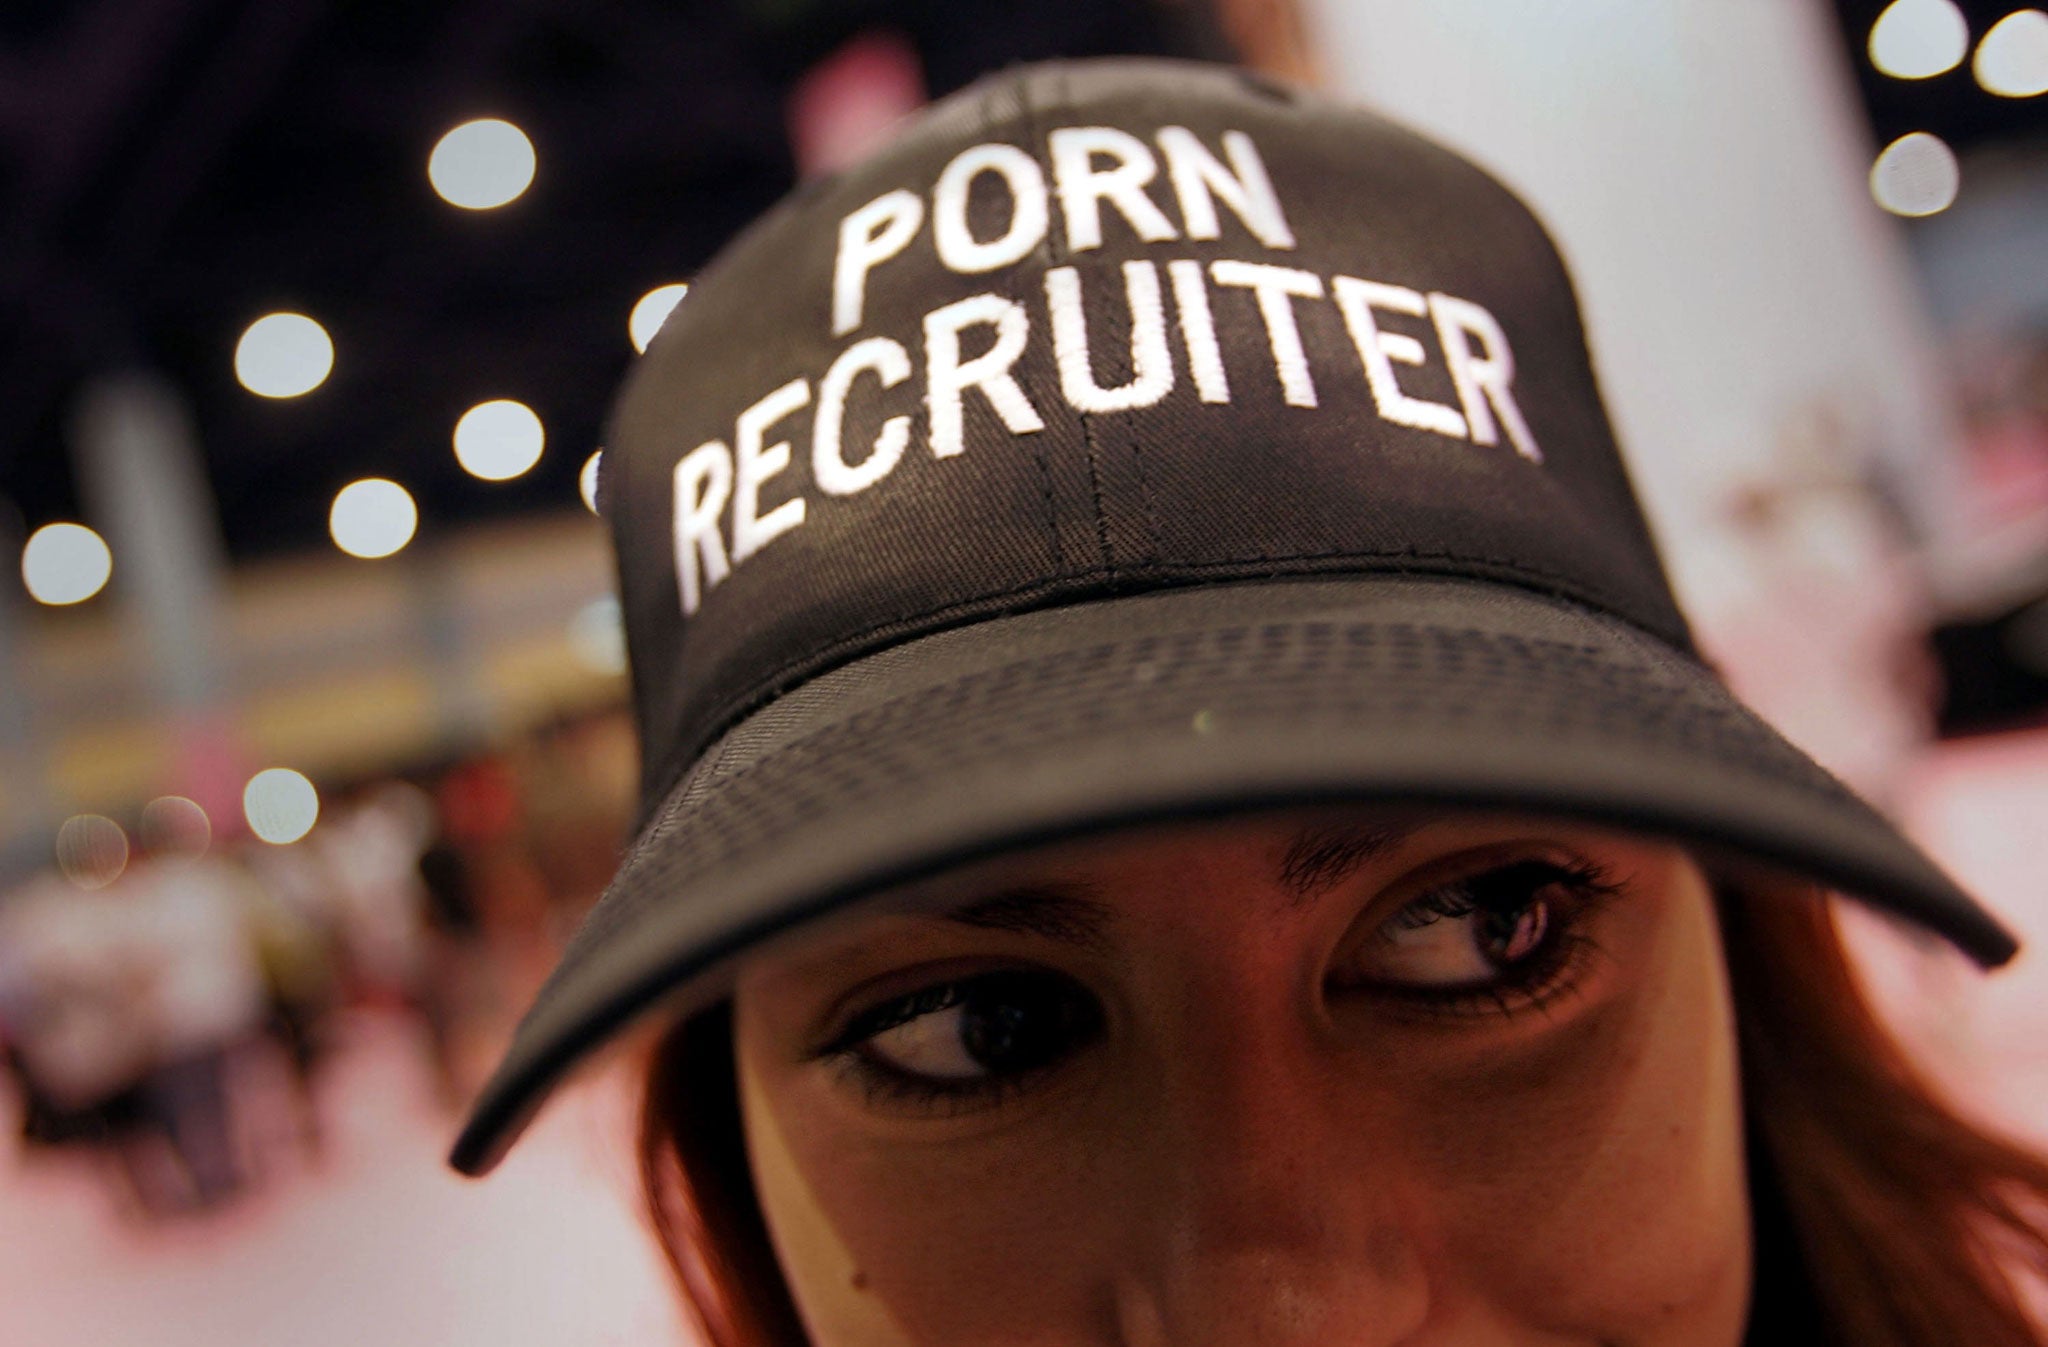 A 'Porn Recruiter' wears her hat during the EXXXOTICA convention in Miami Beach